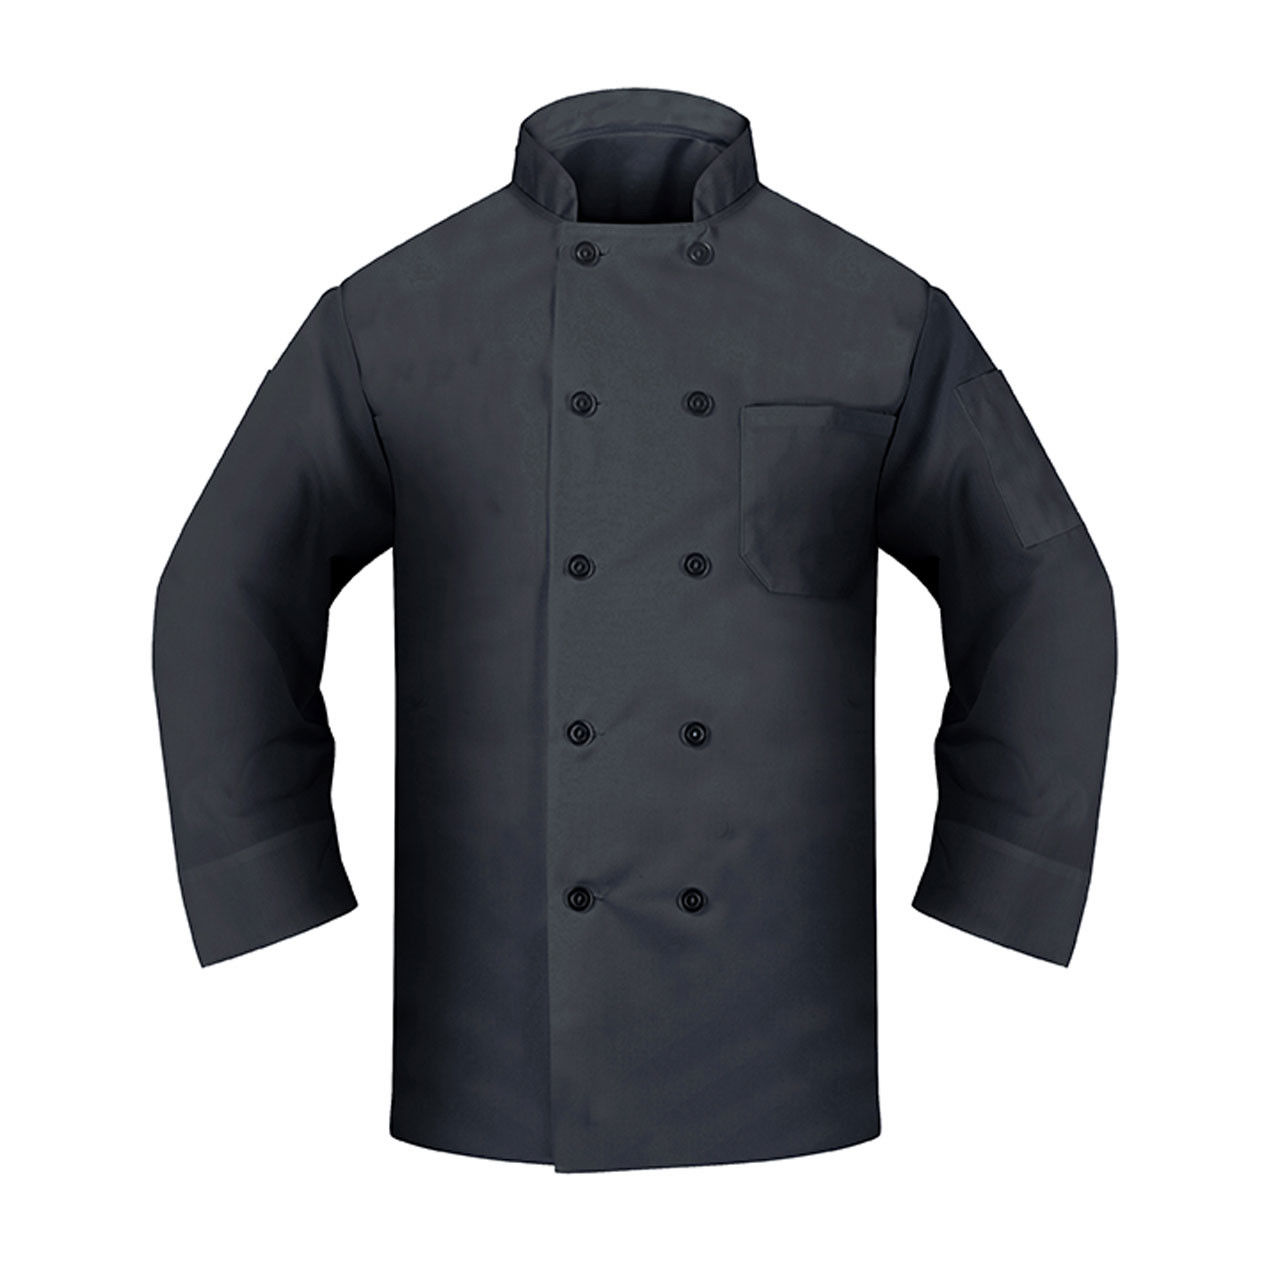 Is the color of these chef coats black?